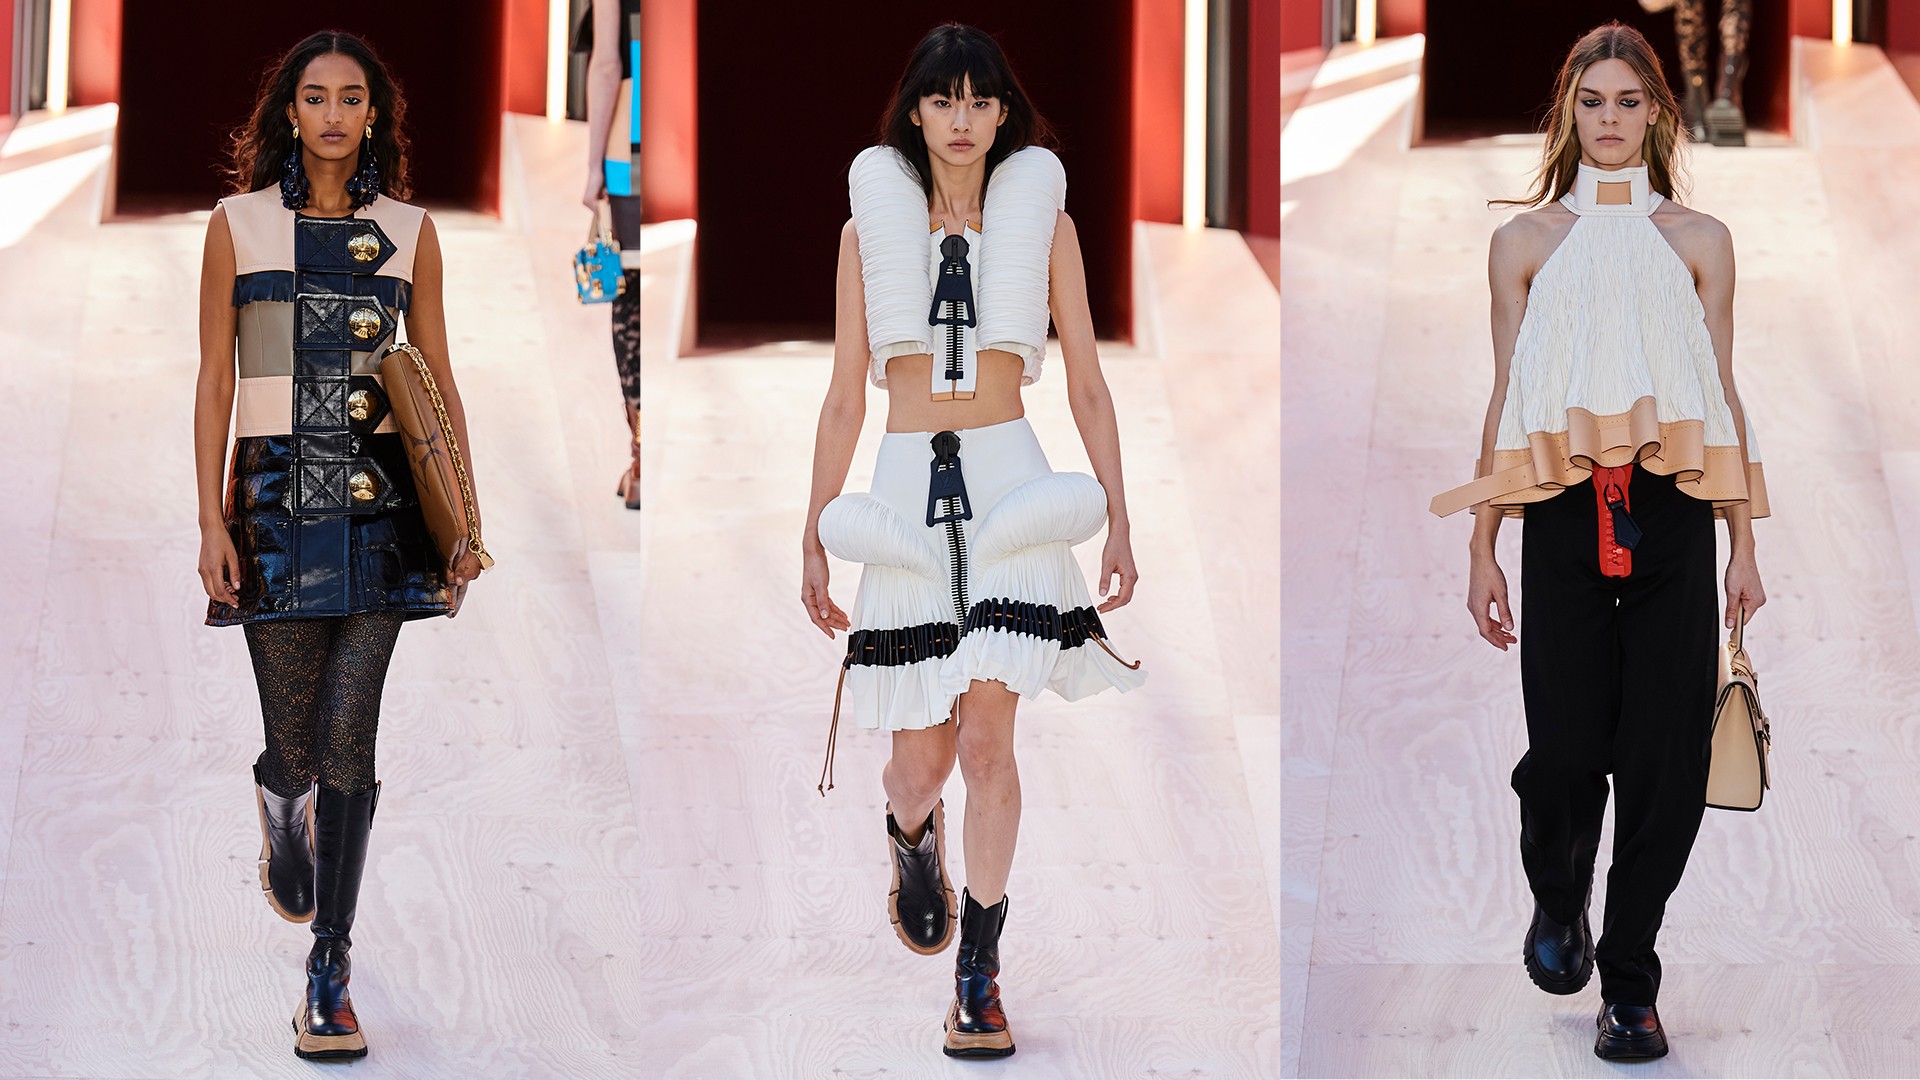 Paris Fashion Week wraps up with sporty, edgy leather from Vuitton